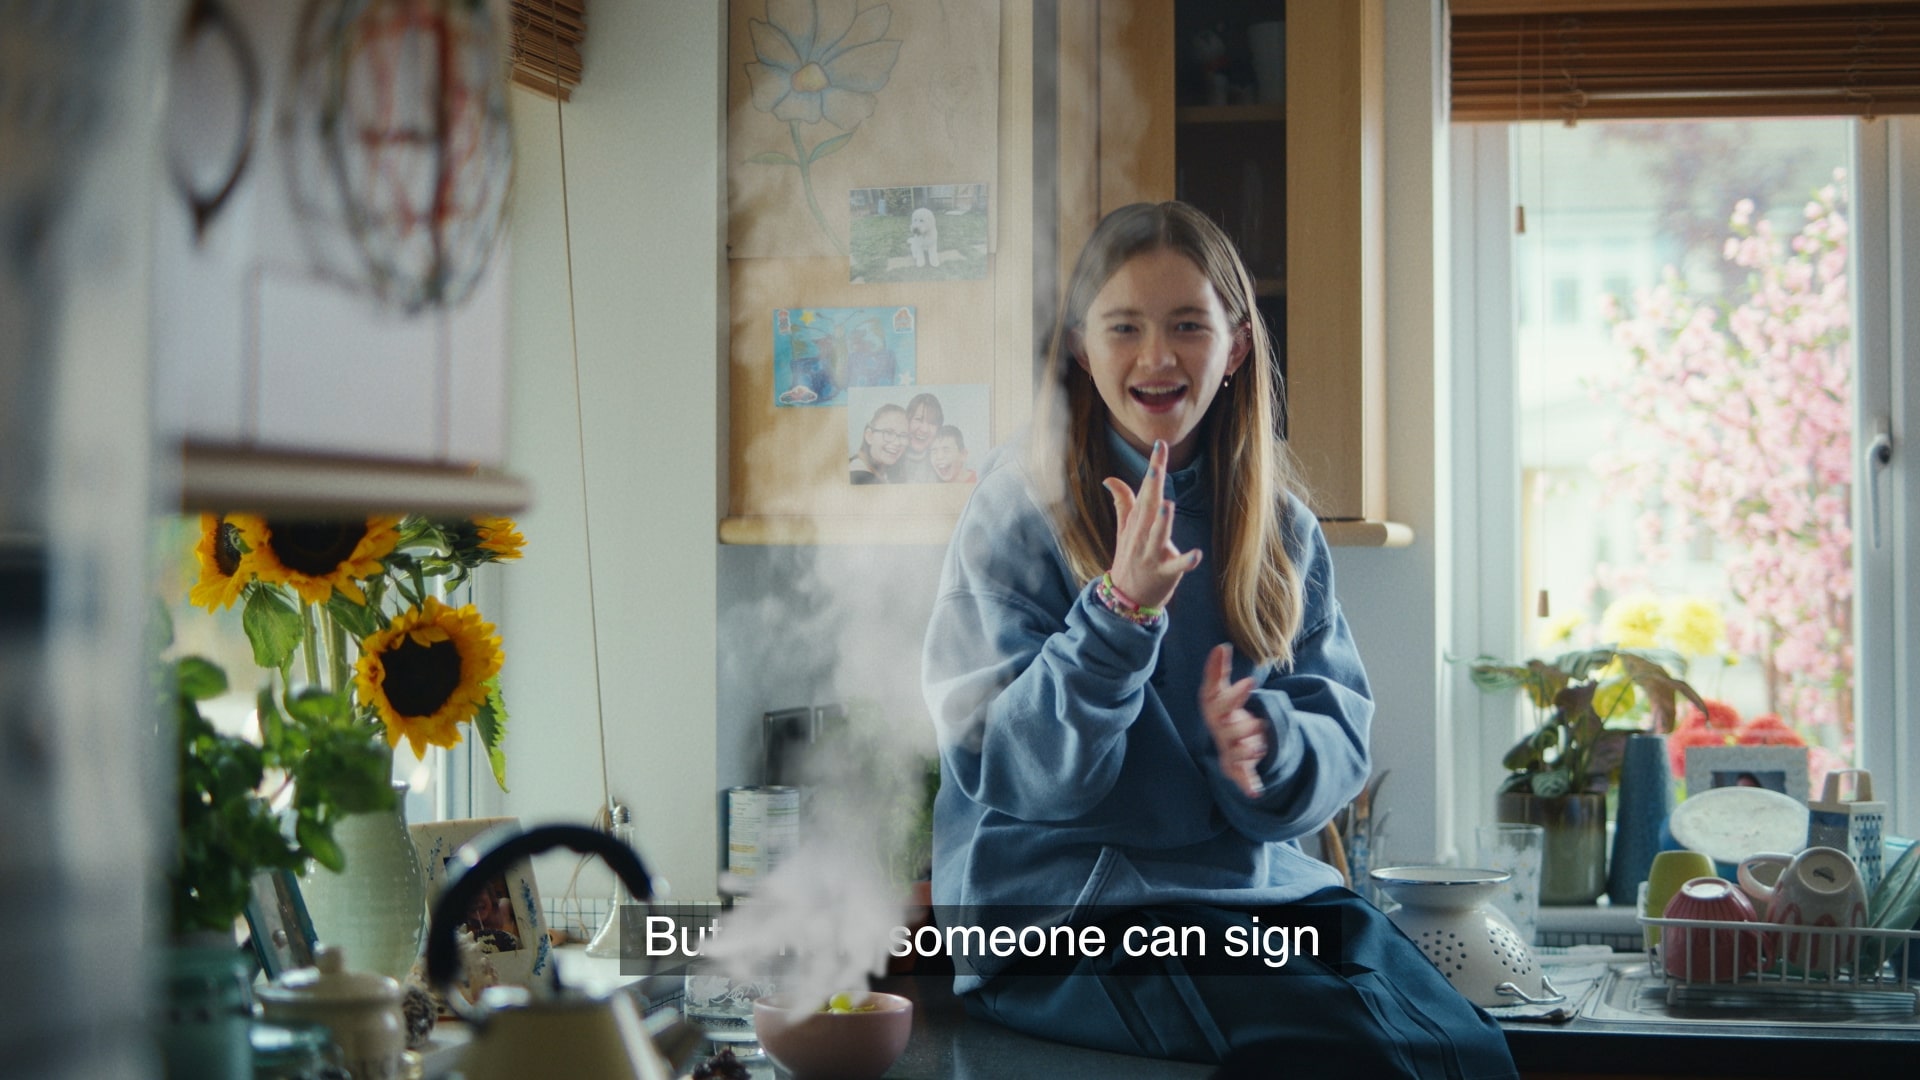 Cadbury Fingers launches new campaign partnering National Deaf Children’s Society